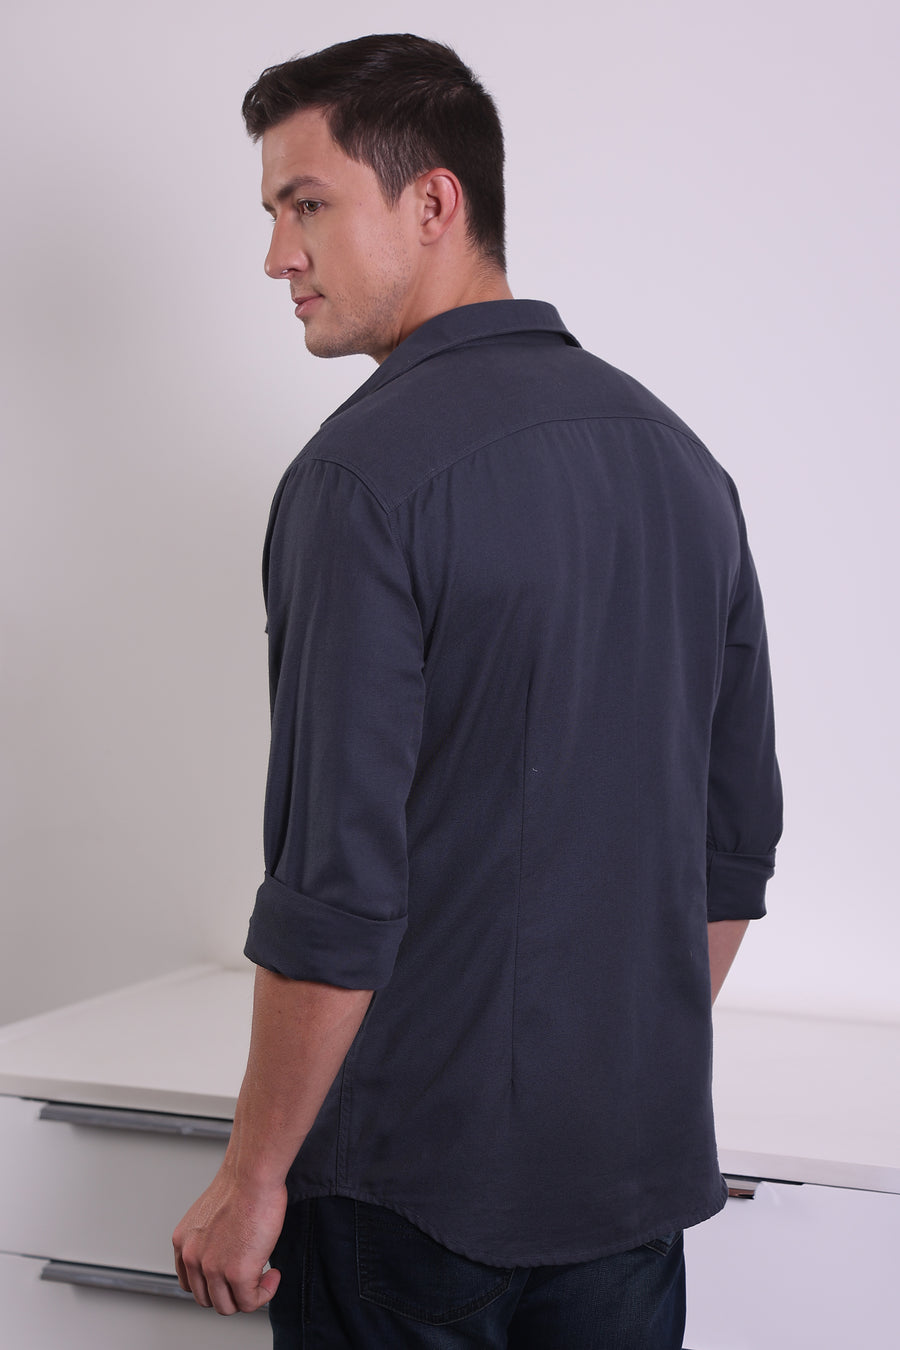 Trewen - Double Pocket Shirt With Snap Button - Grey